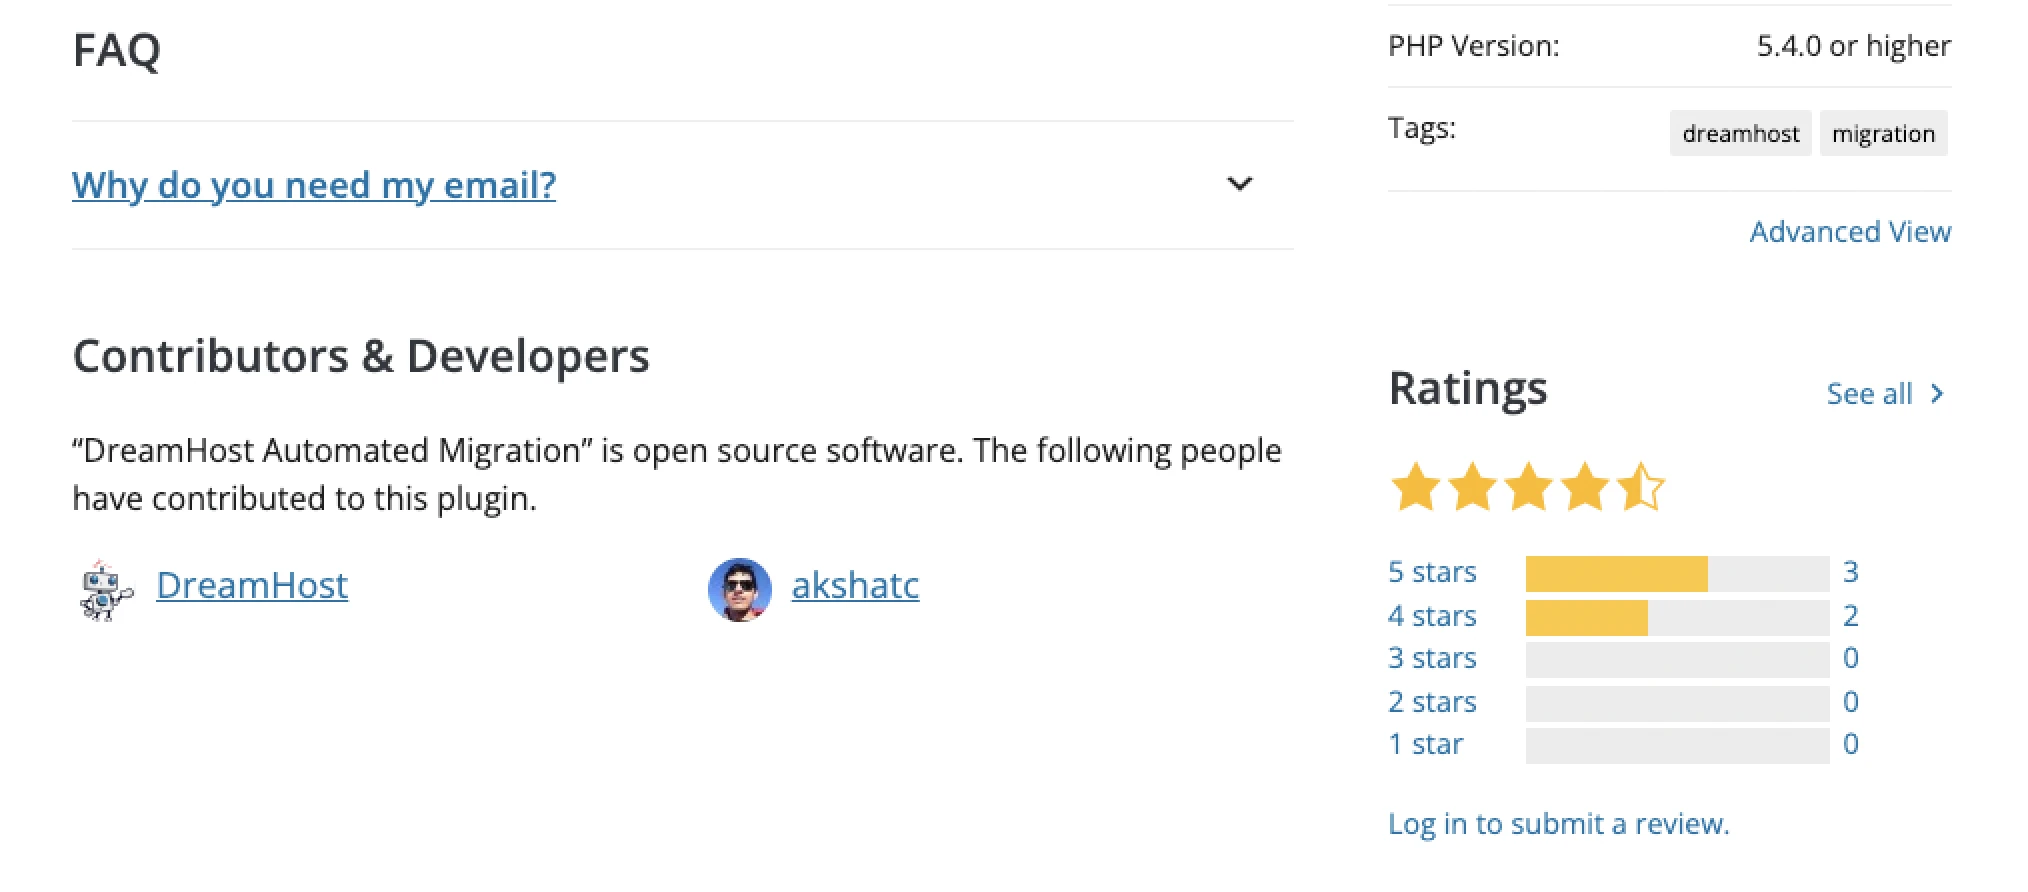 DreamHost WP plugin with details on contributors and developers, tags, and ratings. 